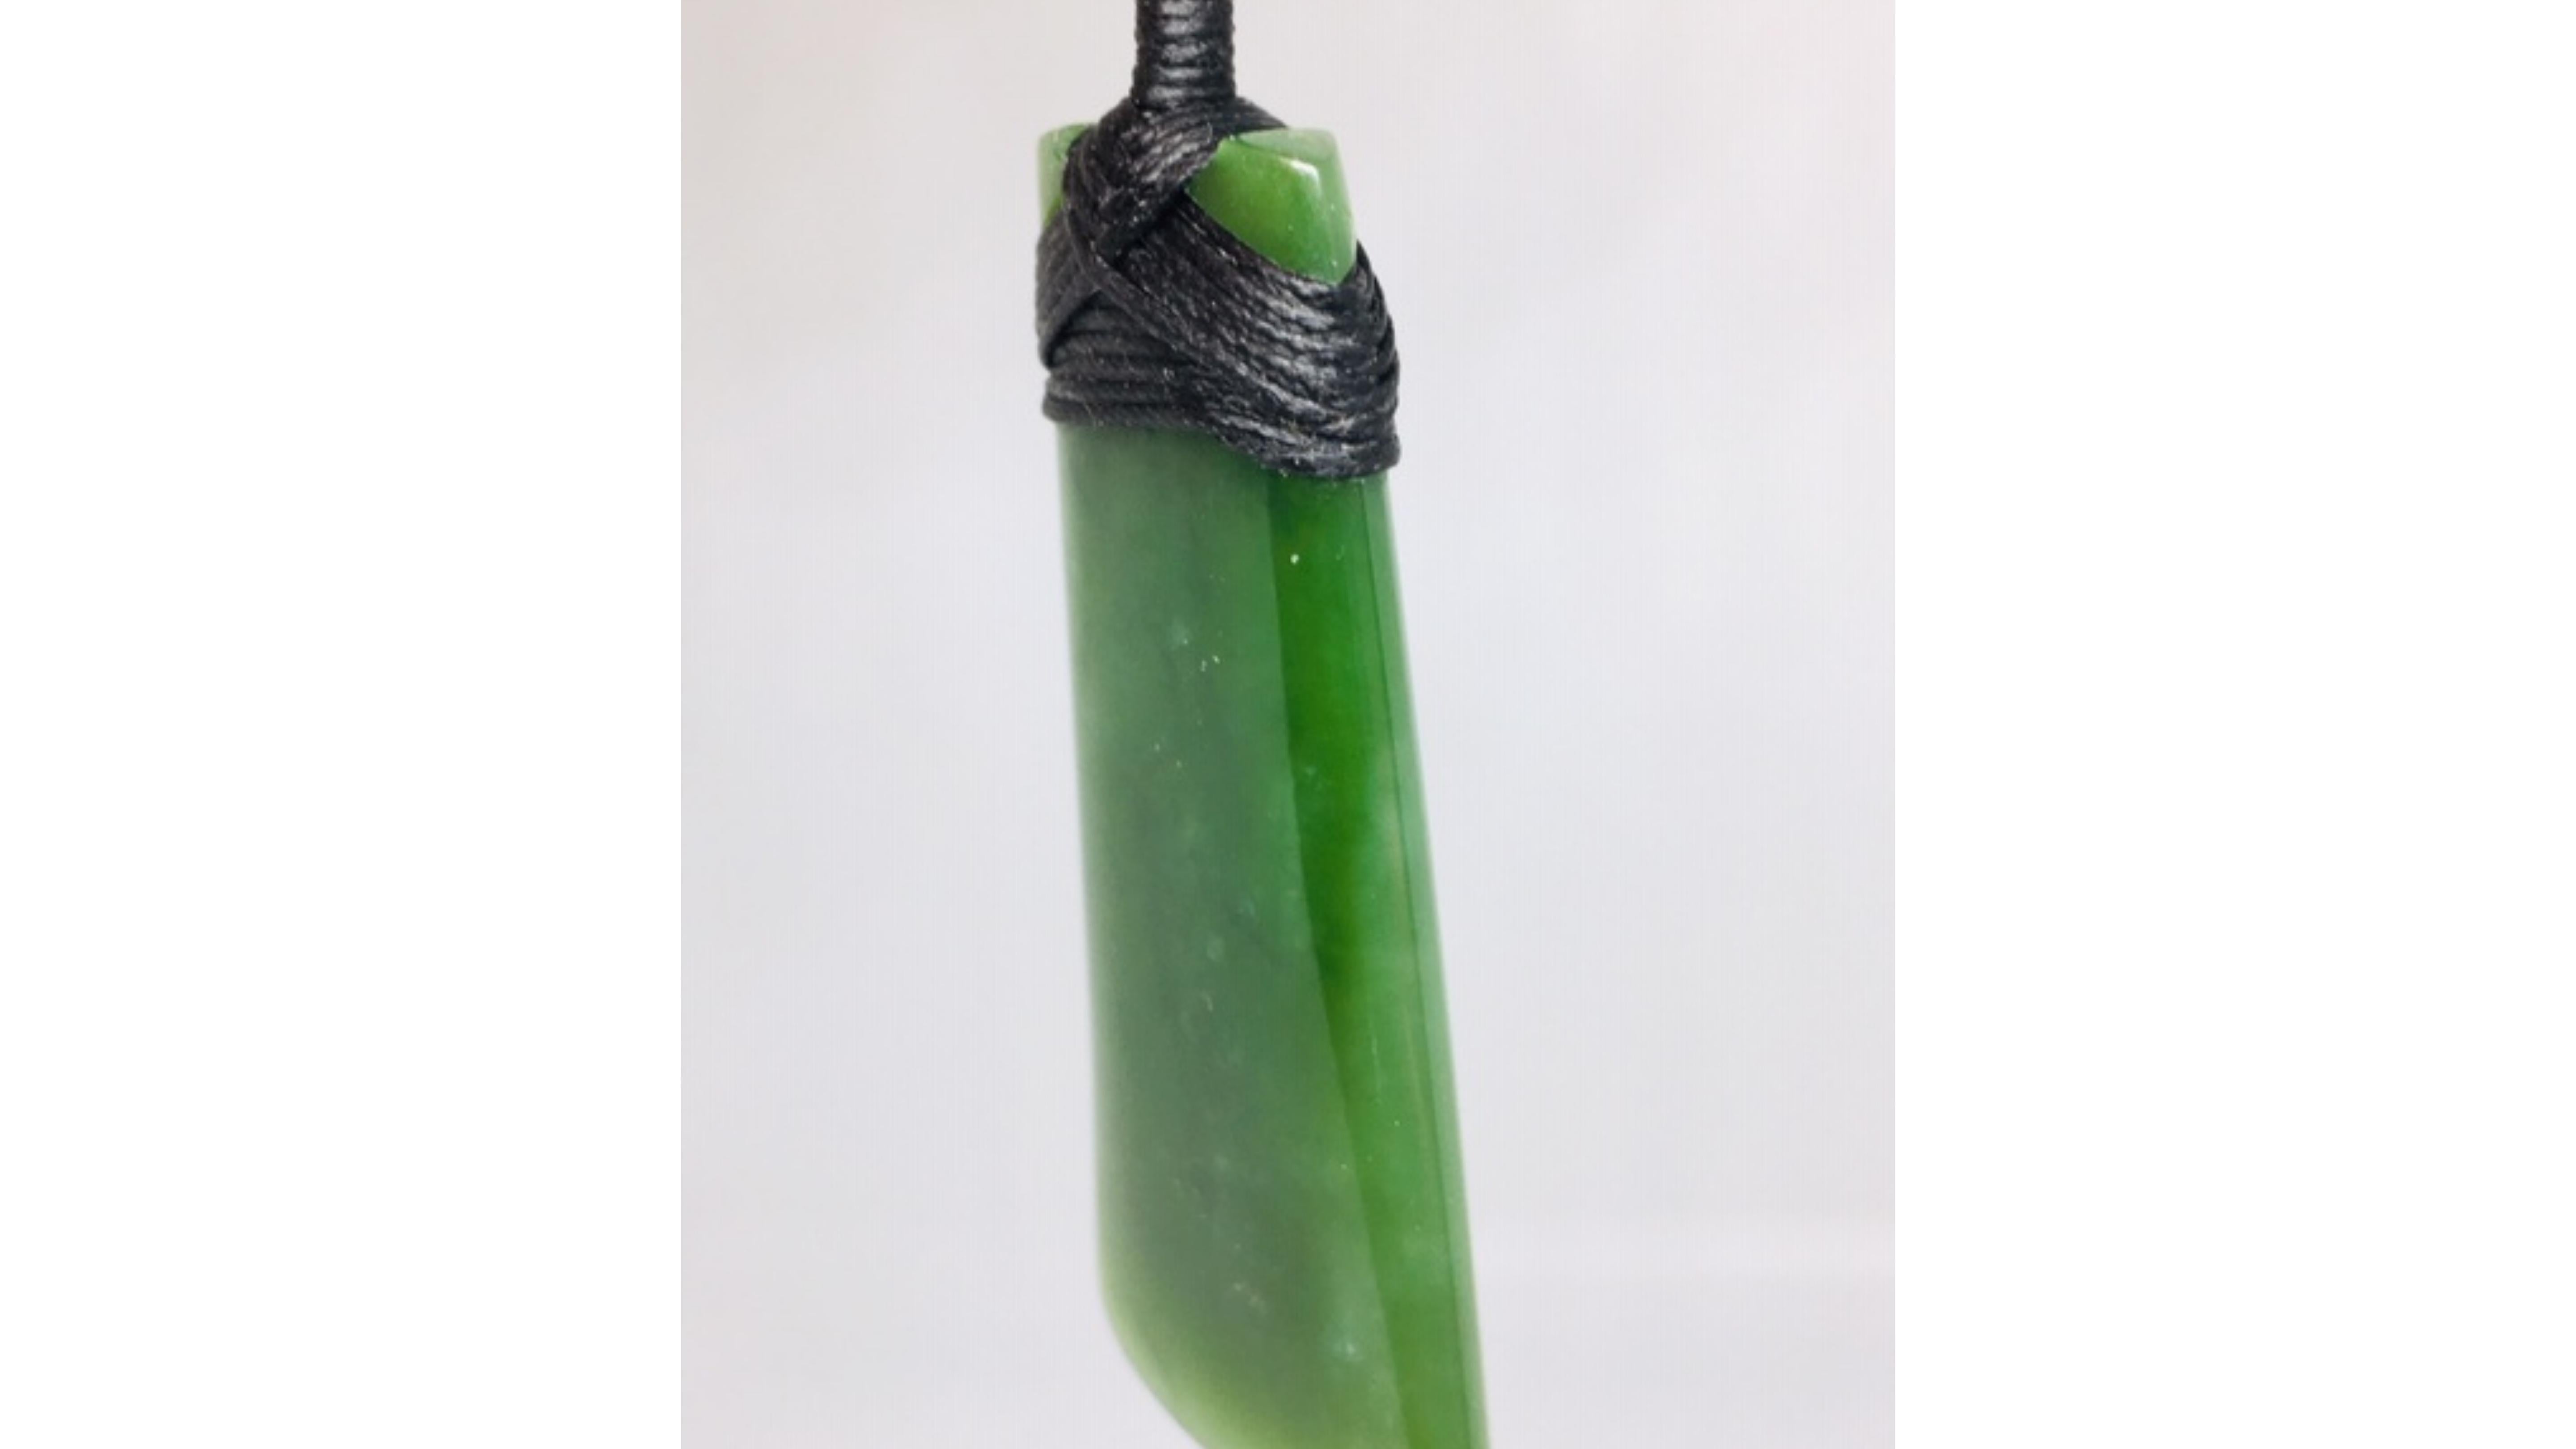 Jade Necklaces From New Zealand .  Chose from these designs as they are different in tones and shapes .  They come on a cord and a gold plated chain.

Toki (Adze) Necklaces

The toki (adze) was a chisel tool used by the Māori people of Aotearoa (New